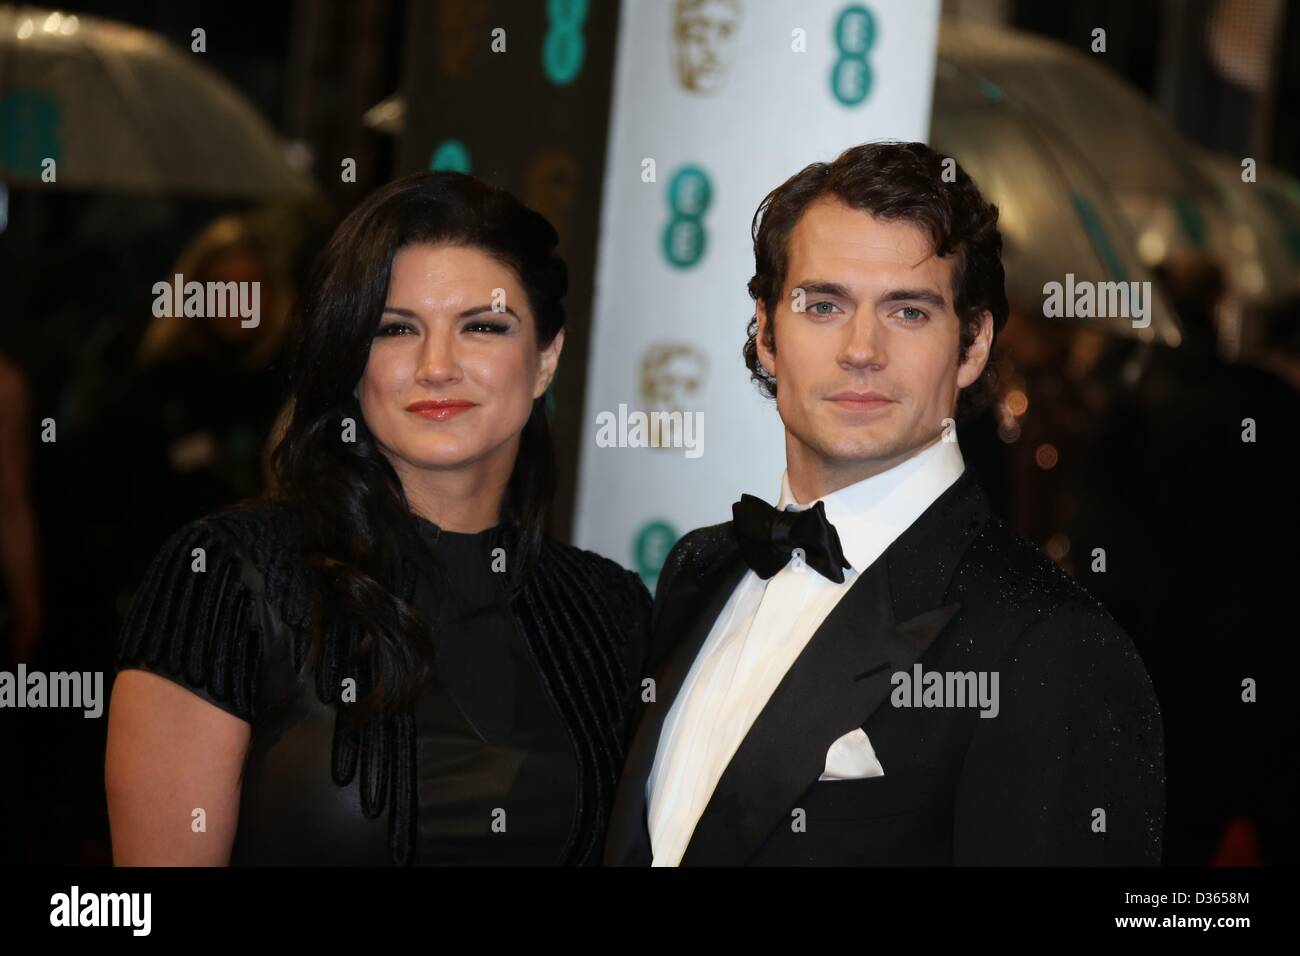 Los Angeles, USA. 22nd February 2013. Actors Henry Cavill and hois  girlfriend Gina Carano arrive at the GREAT British Film Reception at  British Consul General's Residence in Los Angeles, USA, on 22